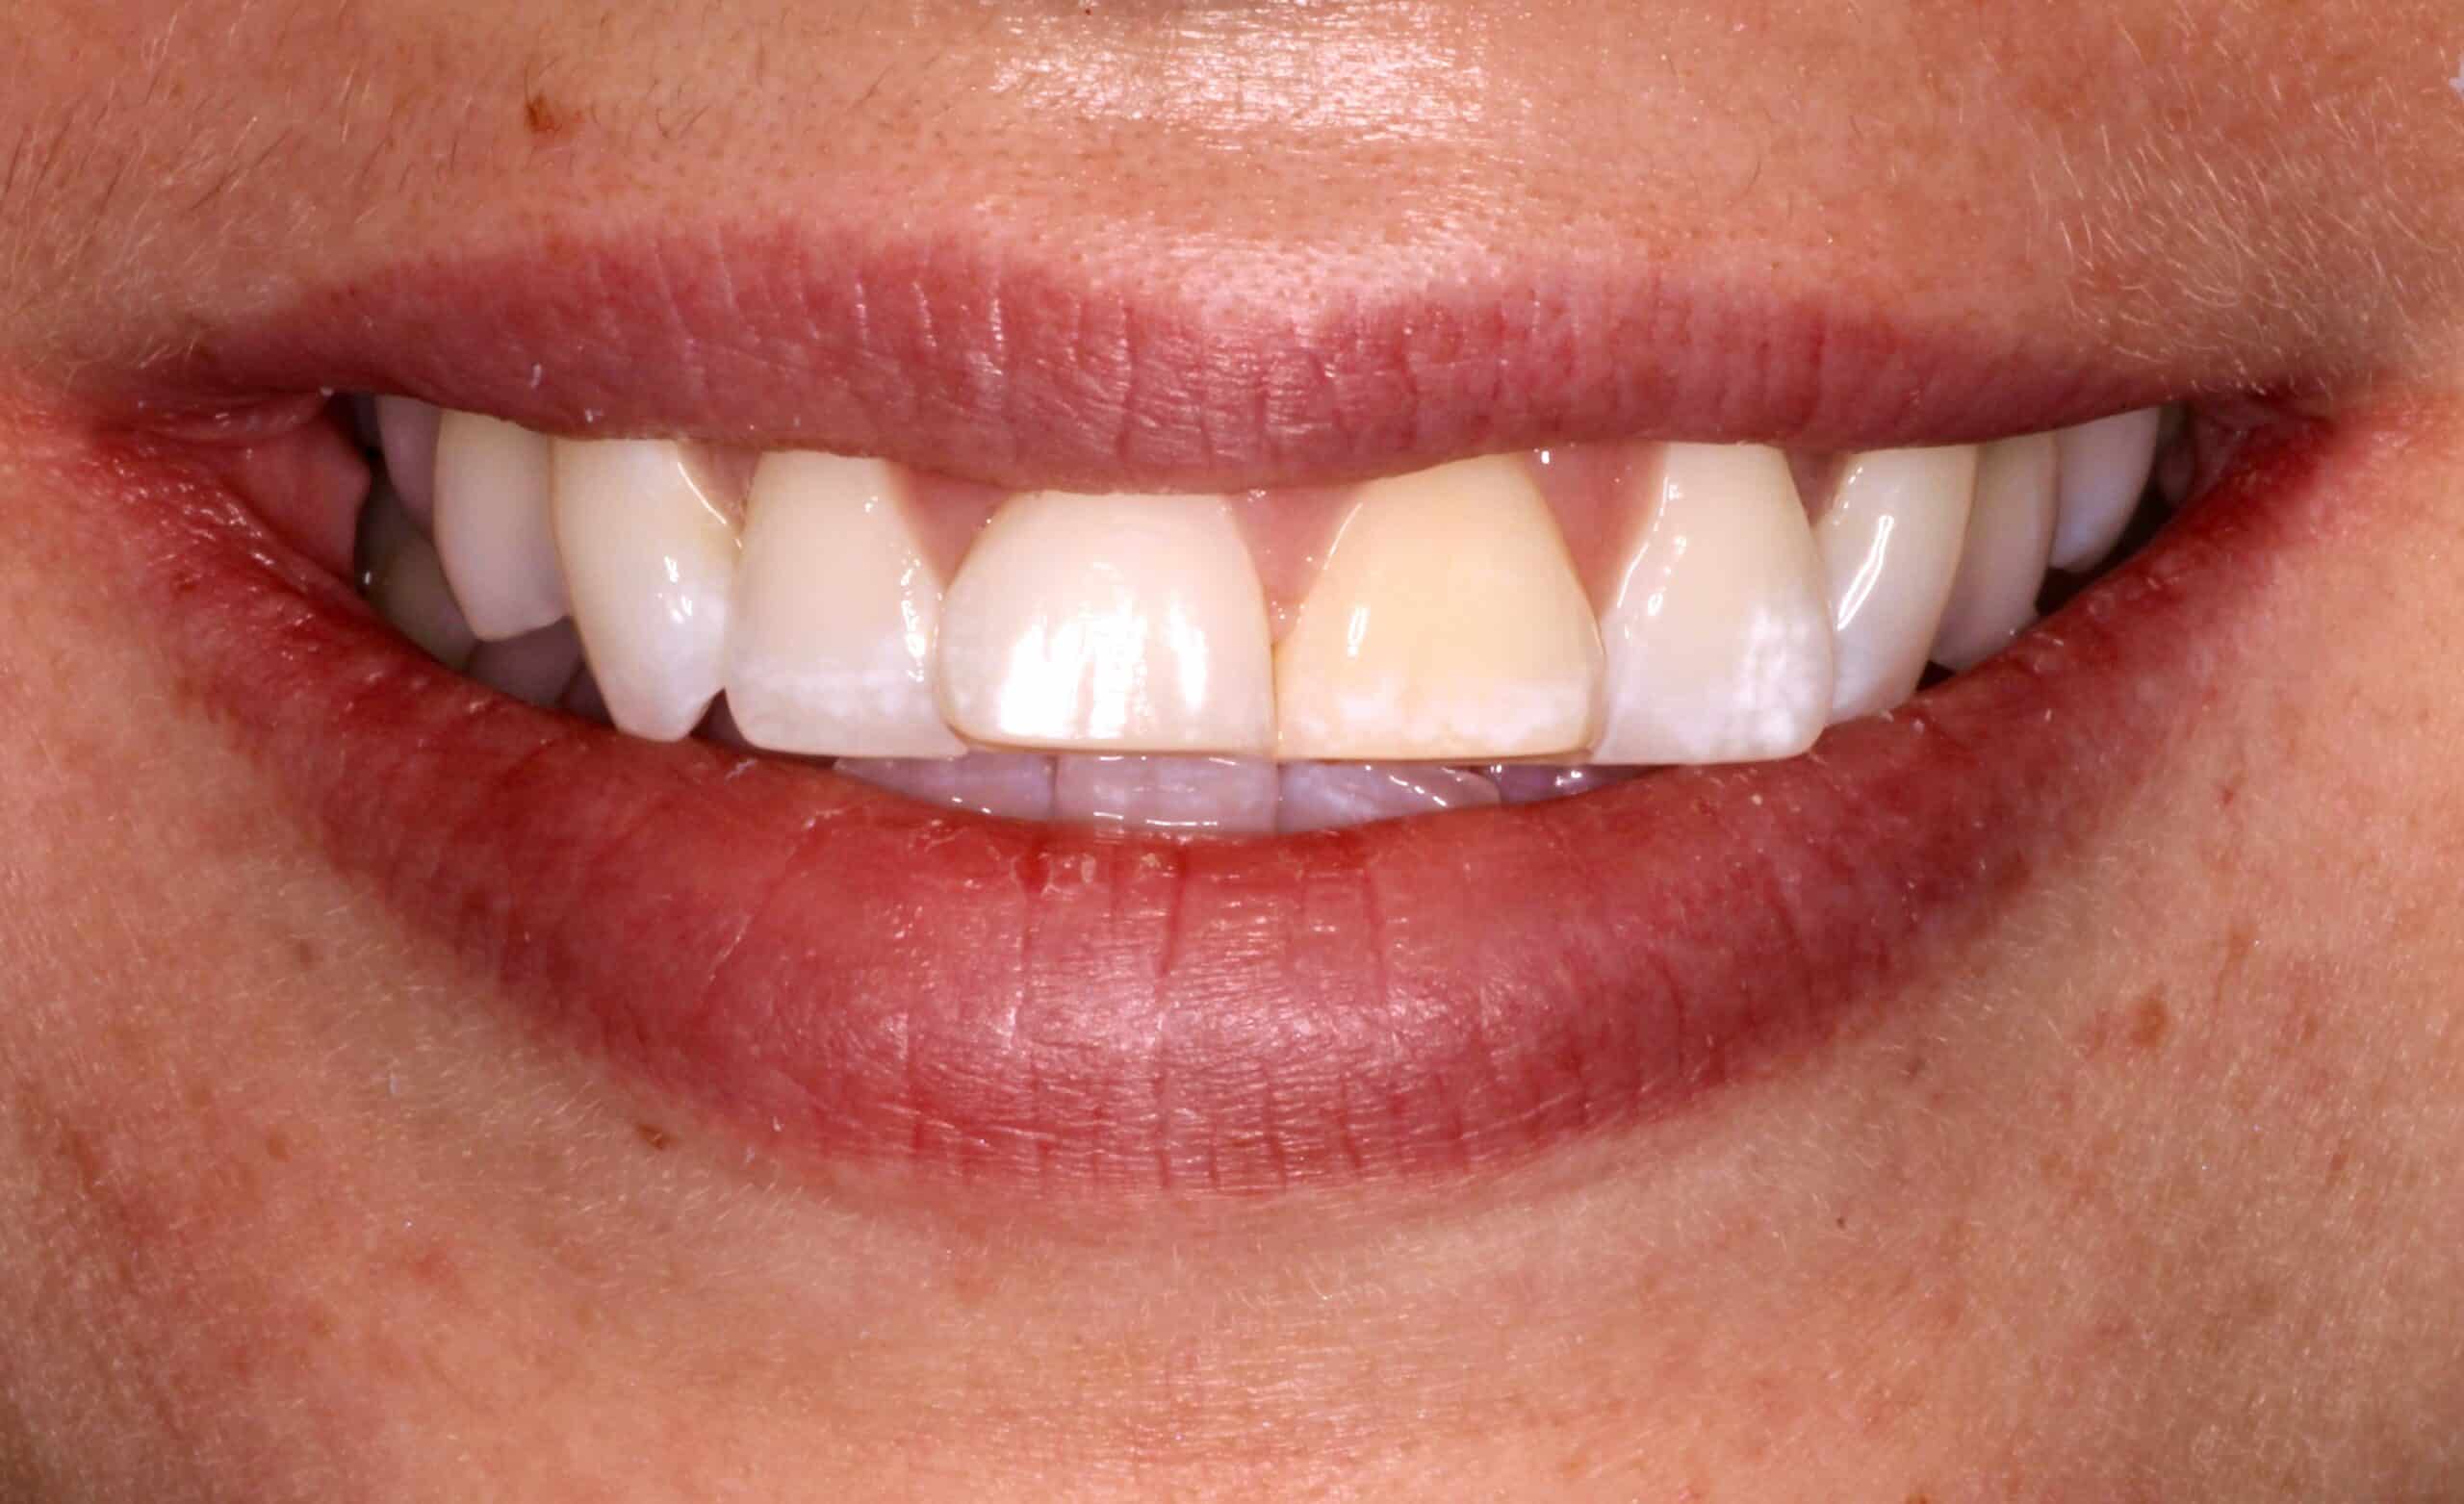 A close-up image of a patient’s crowded, uneven teeth